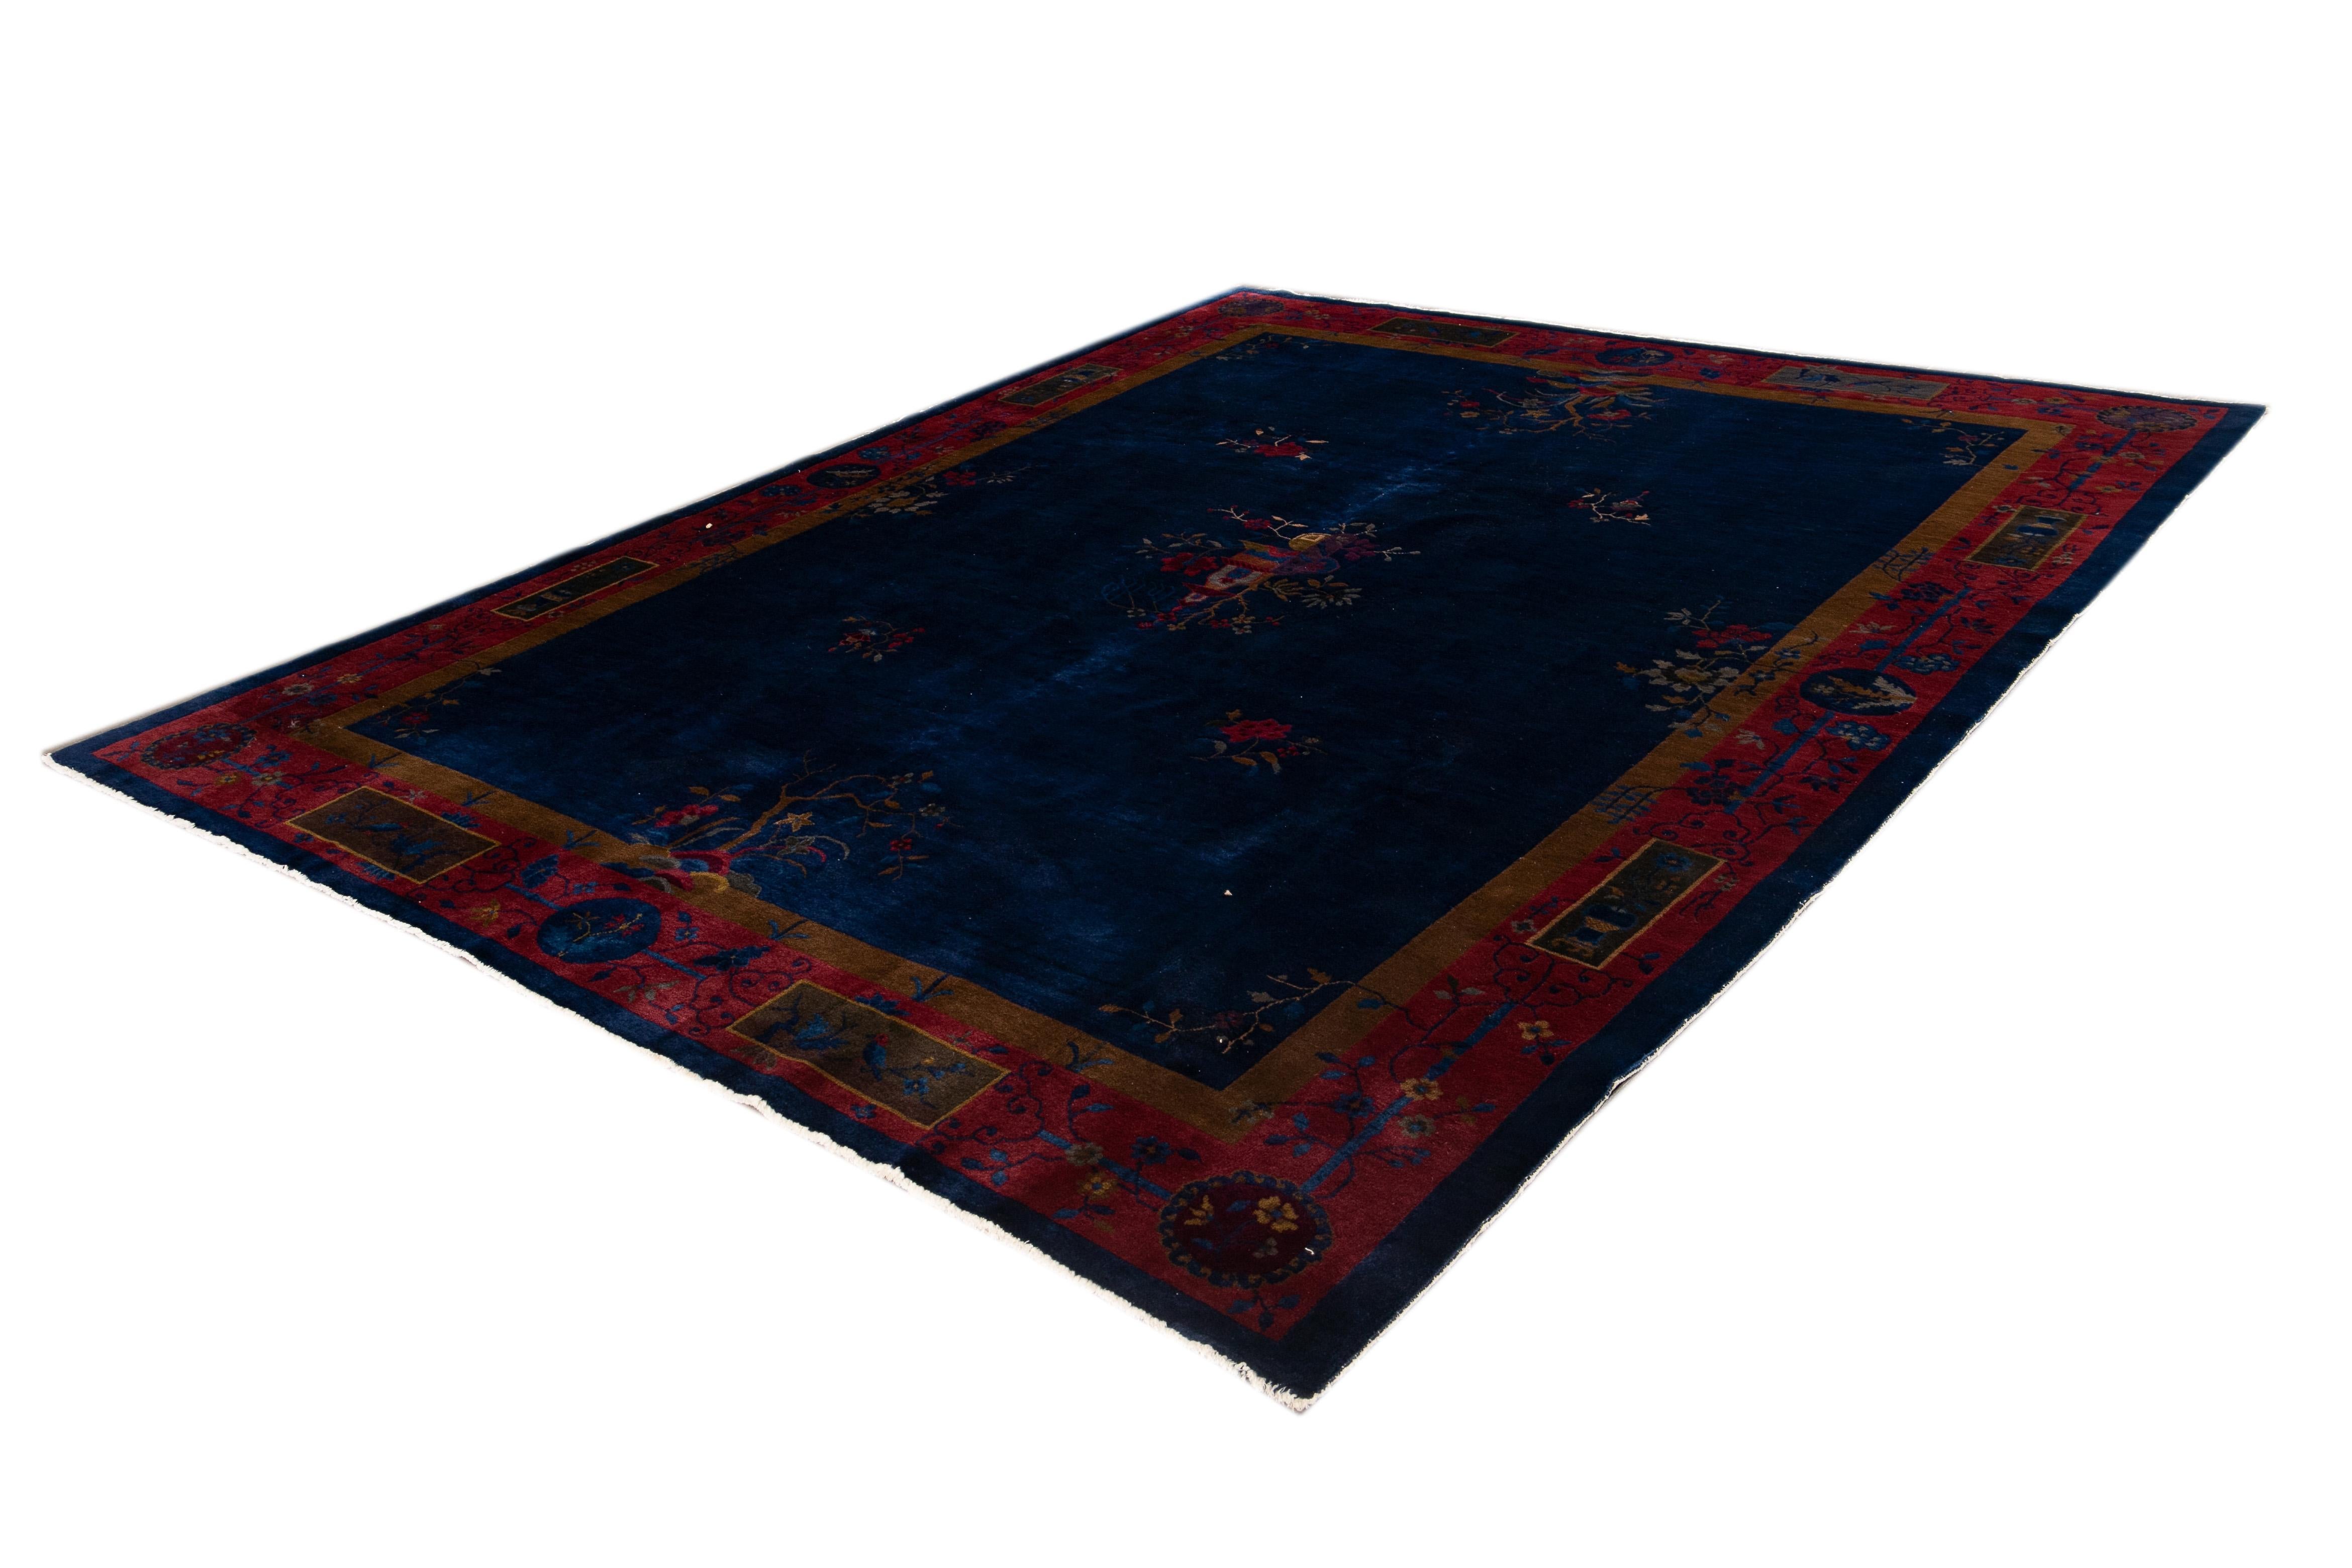 Beautiful vintage Chinese Art Deco hand-knotted wool rug with a navy blue field and red border with multicolored accents and all-over floral design.

This rug measures 9' 0